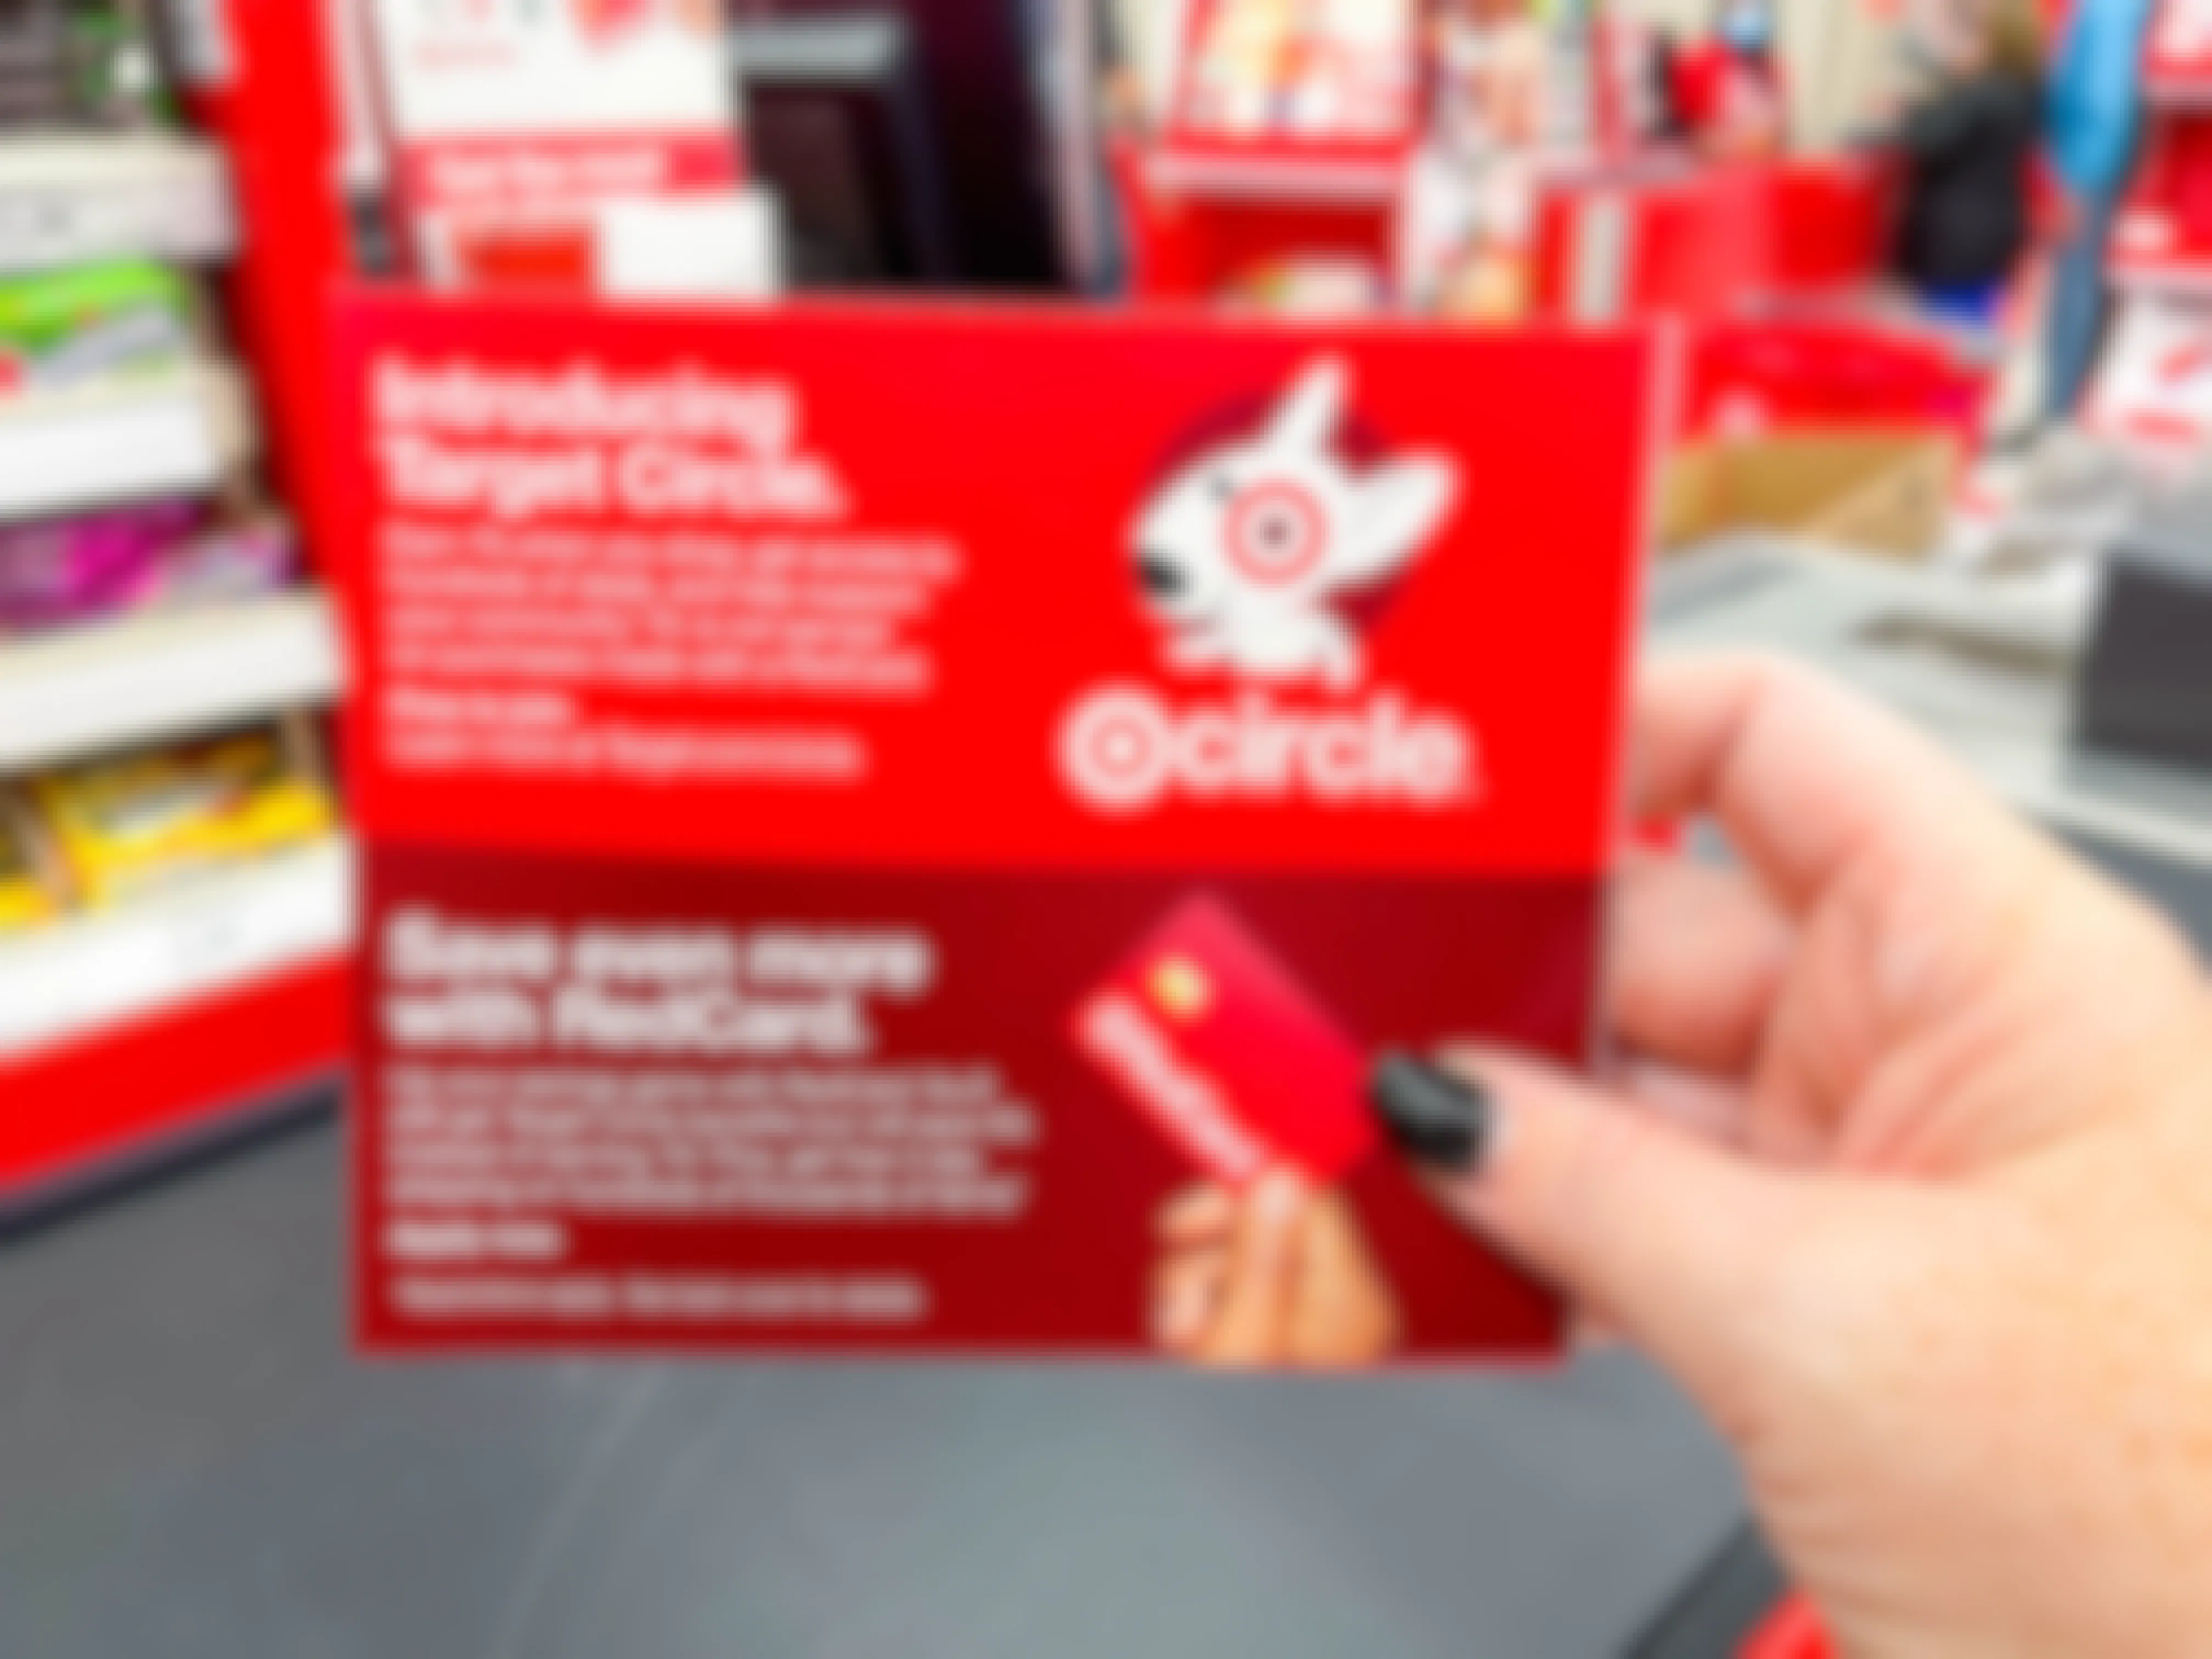 A person's hand holding a Target RedCard information card in front of the checkout lane at Target.